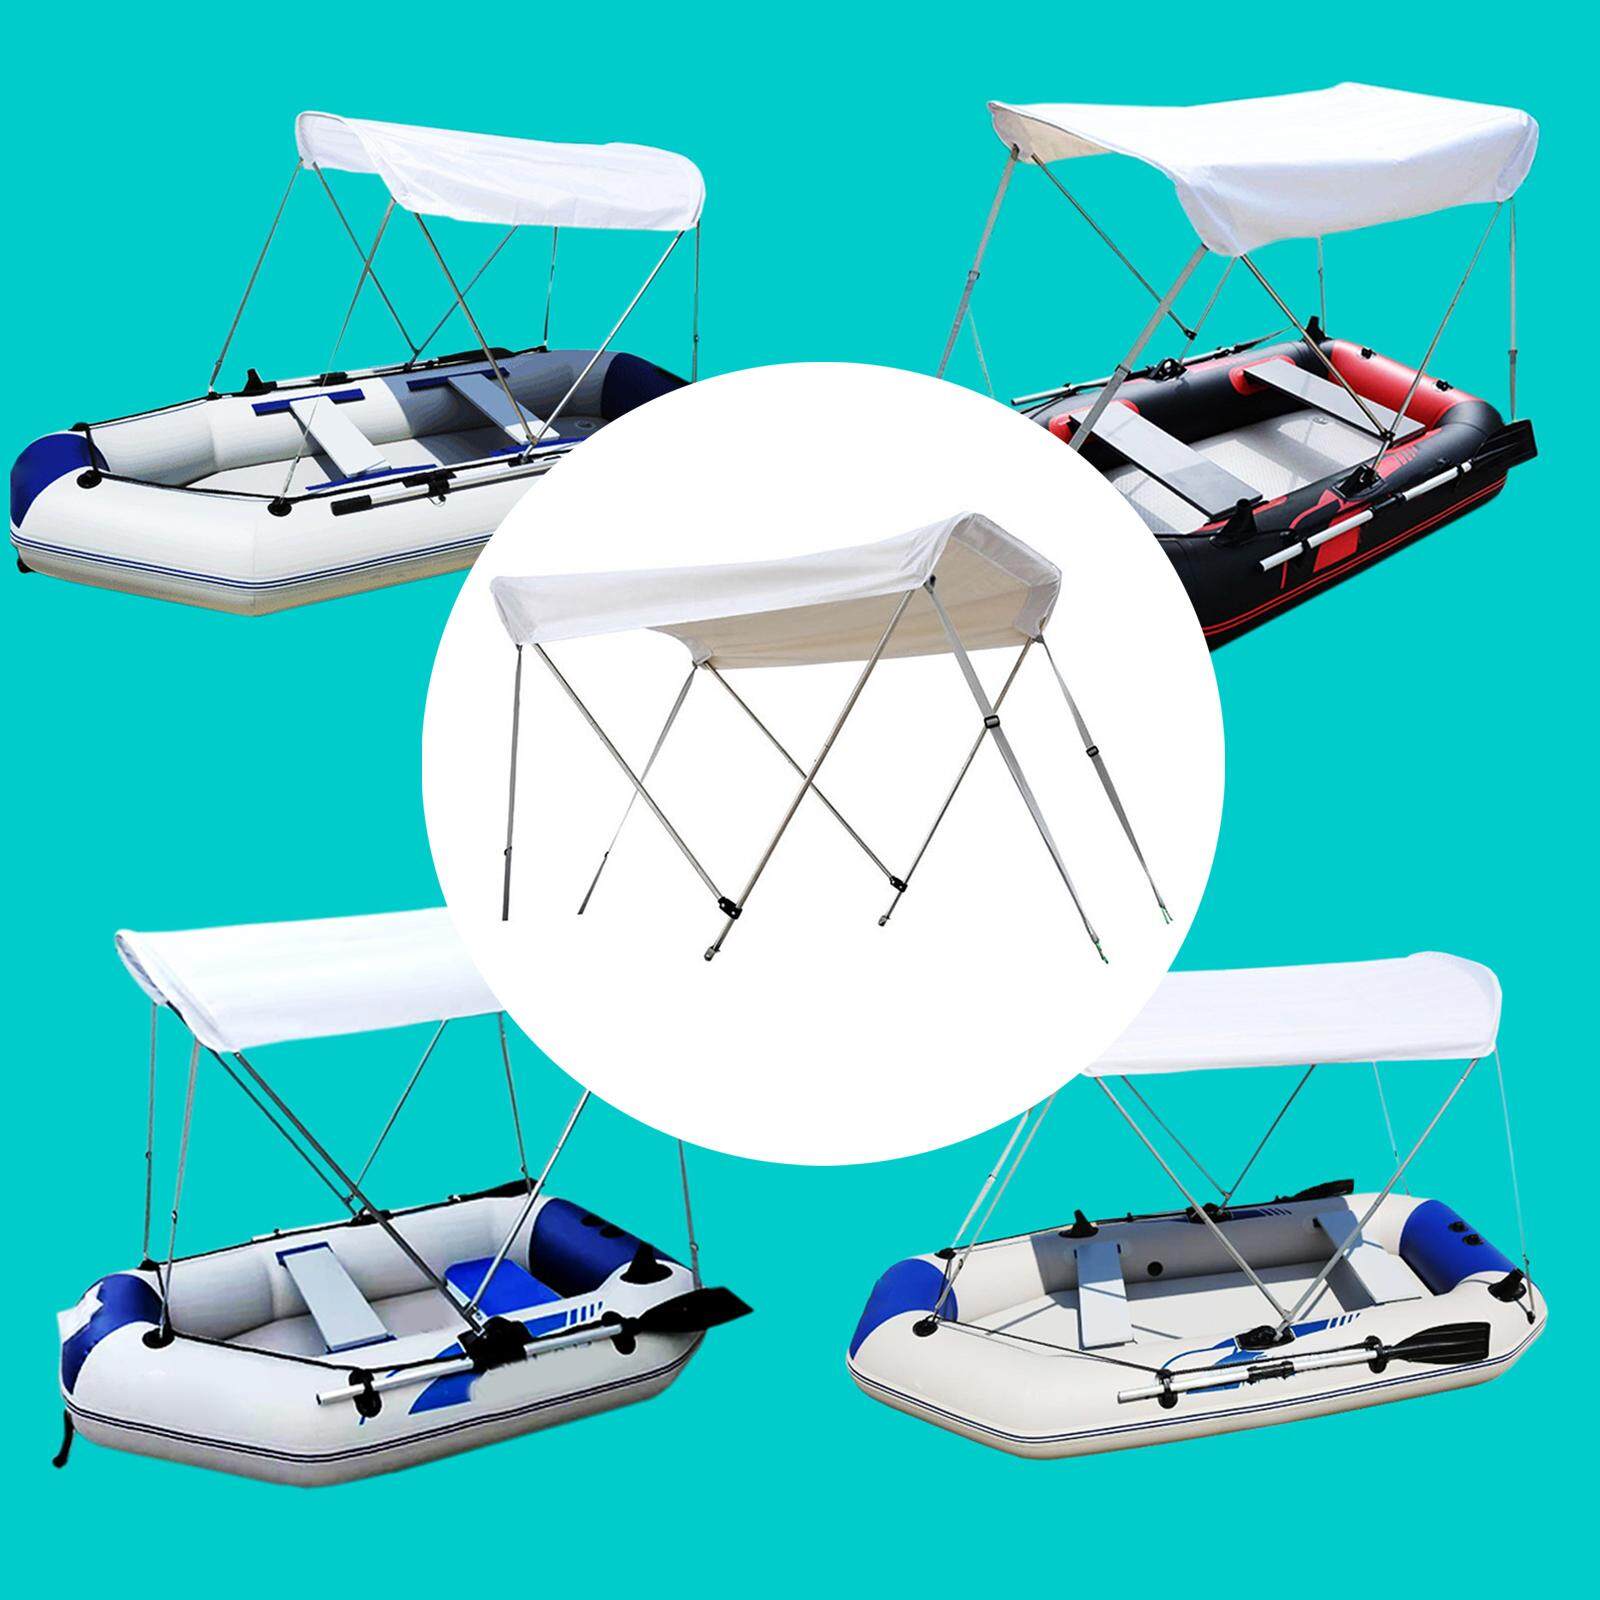 Flameer Heavy Duty Water UV Protection Inflatable Boat/Dinghy/Tender Cover Storage Accessories 